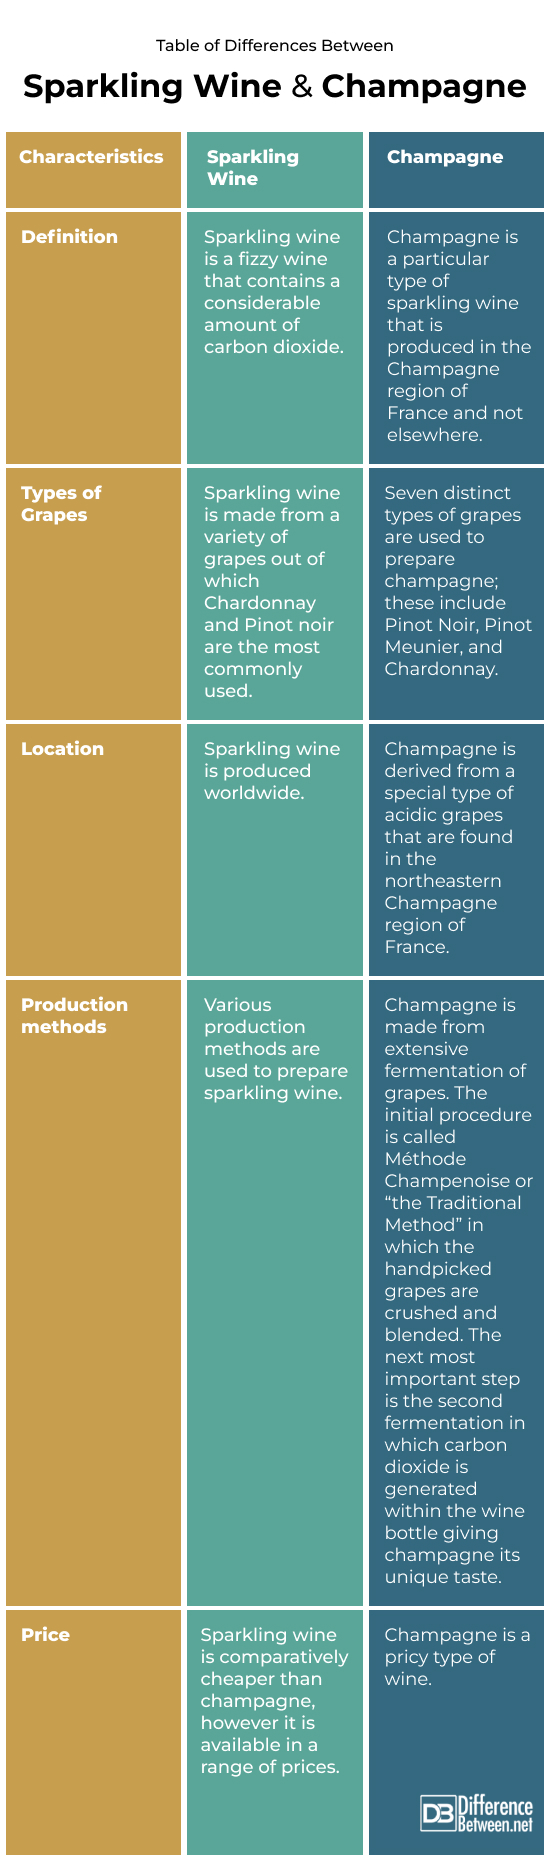 Sparkling Wine and Champagne